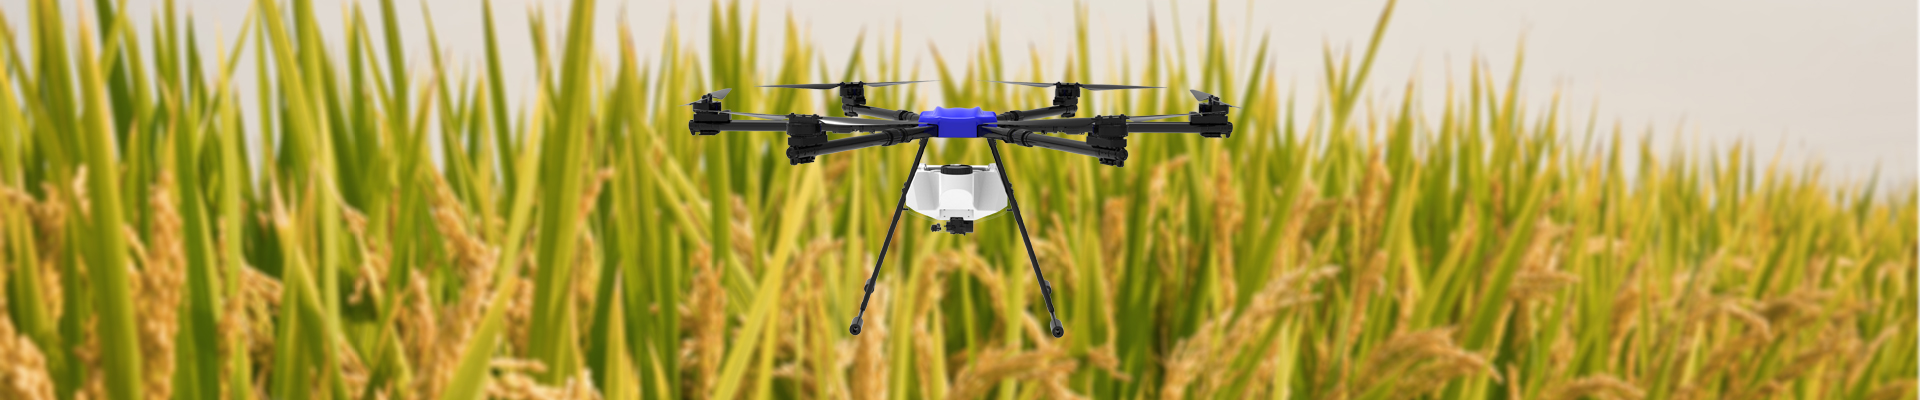 Multi rotor agricultural Drone